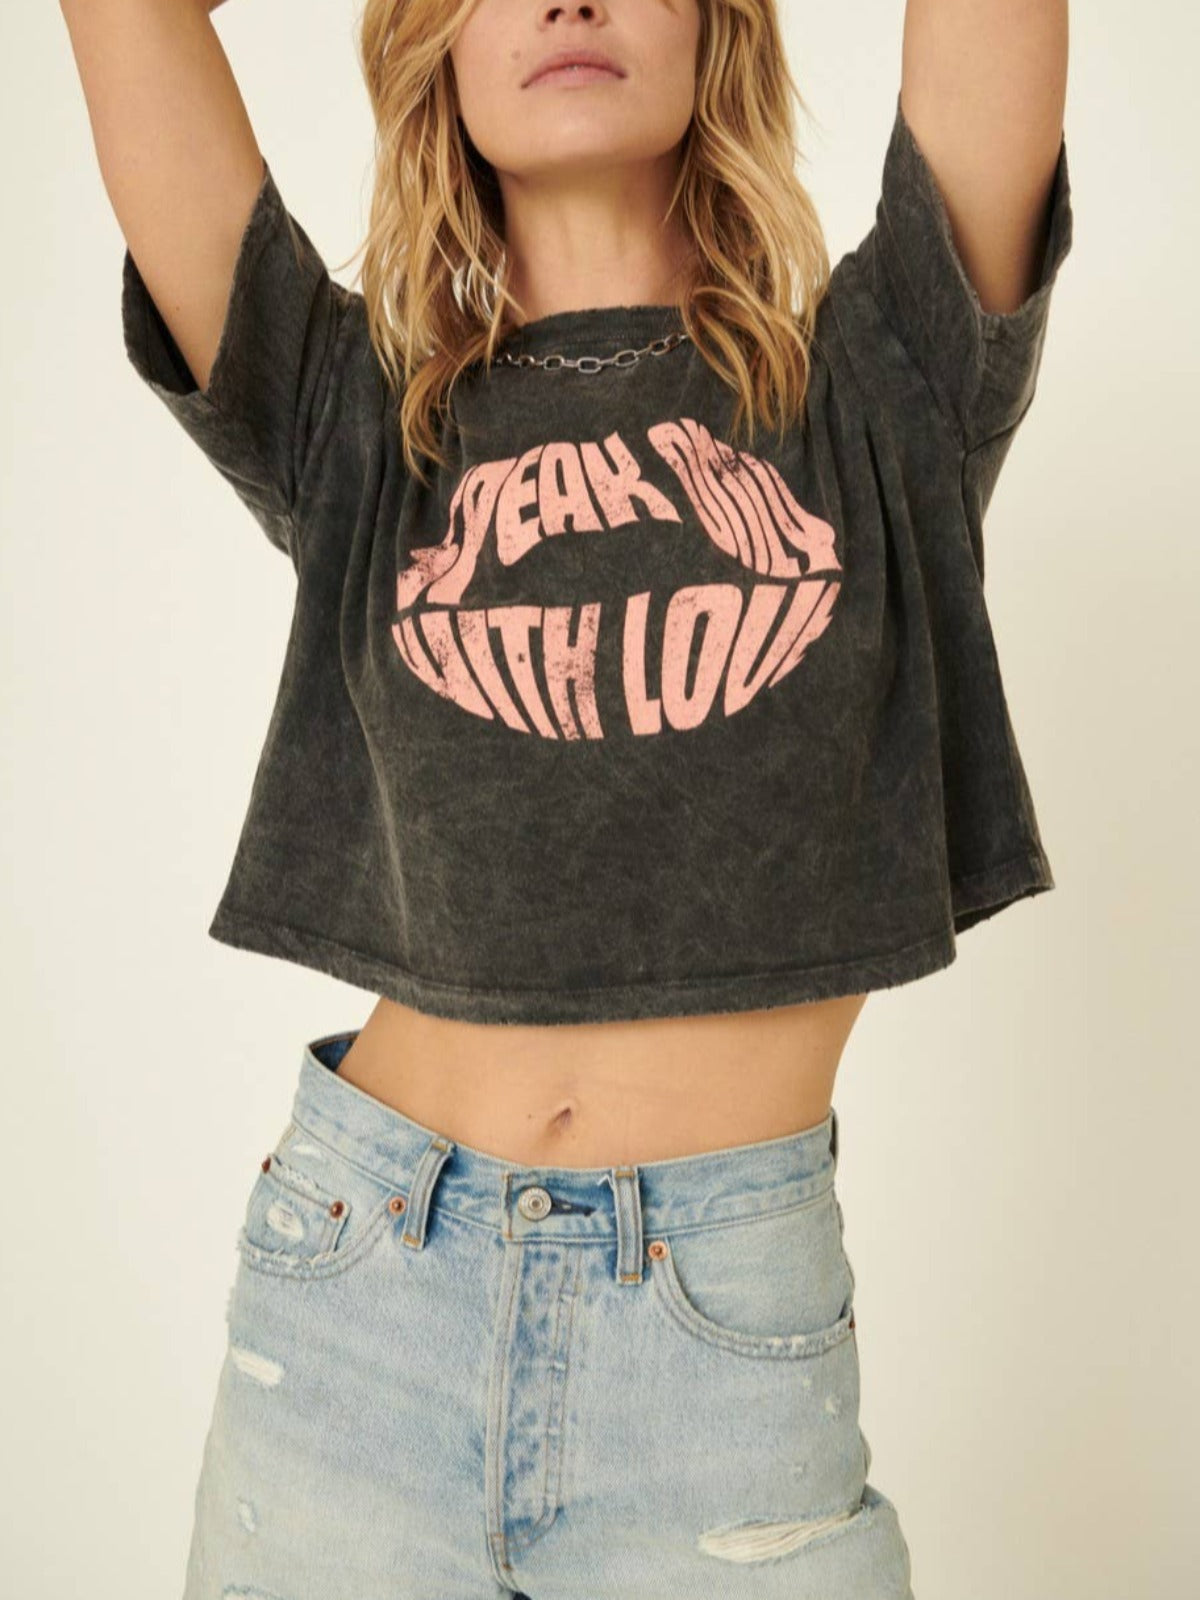 Speak Only with Love Vintage-Wash Cropped Graphic Tee